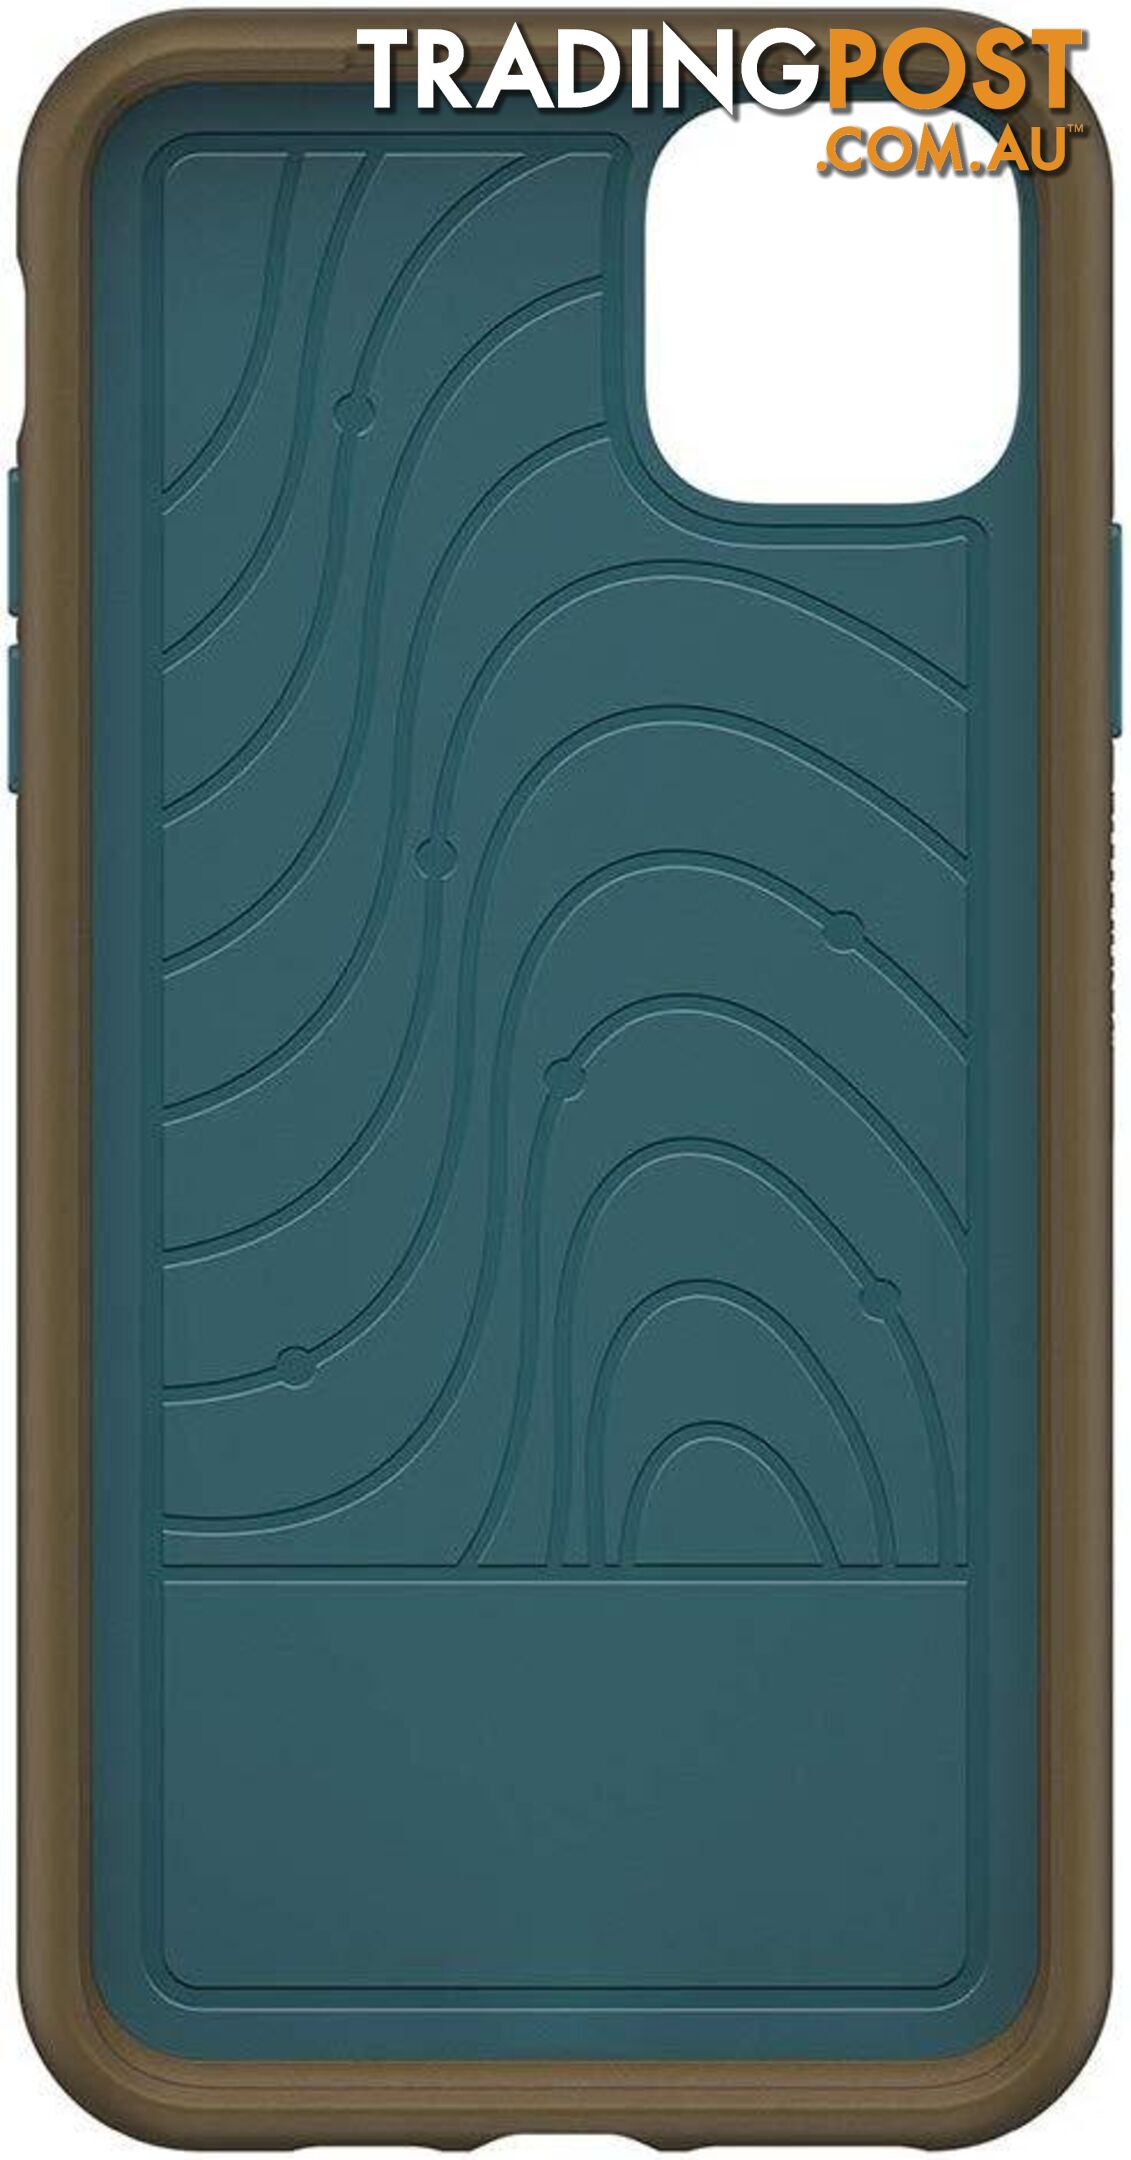 Otterbox Symmetry IML Case For iPhone 11 Pro Max - OtterBox - Feeling Rusty - 660543512639